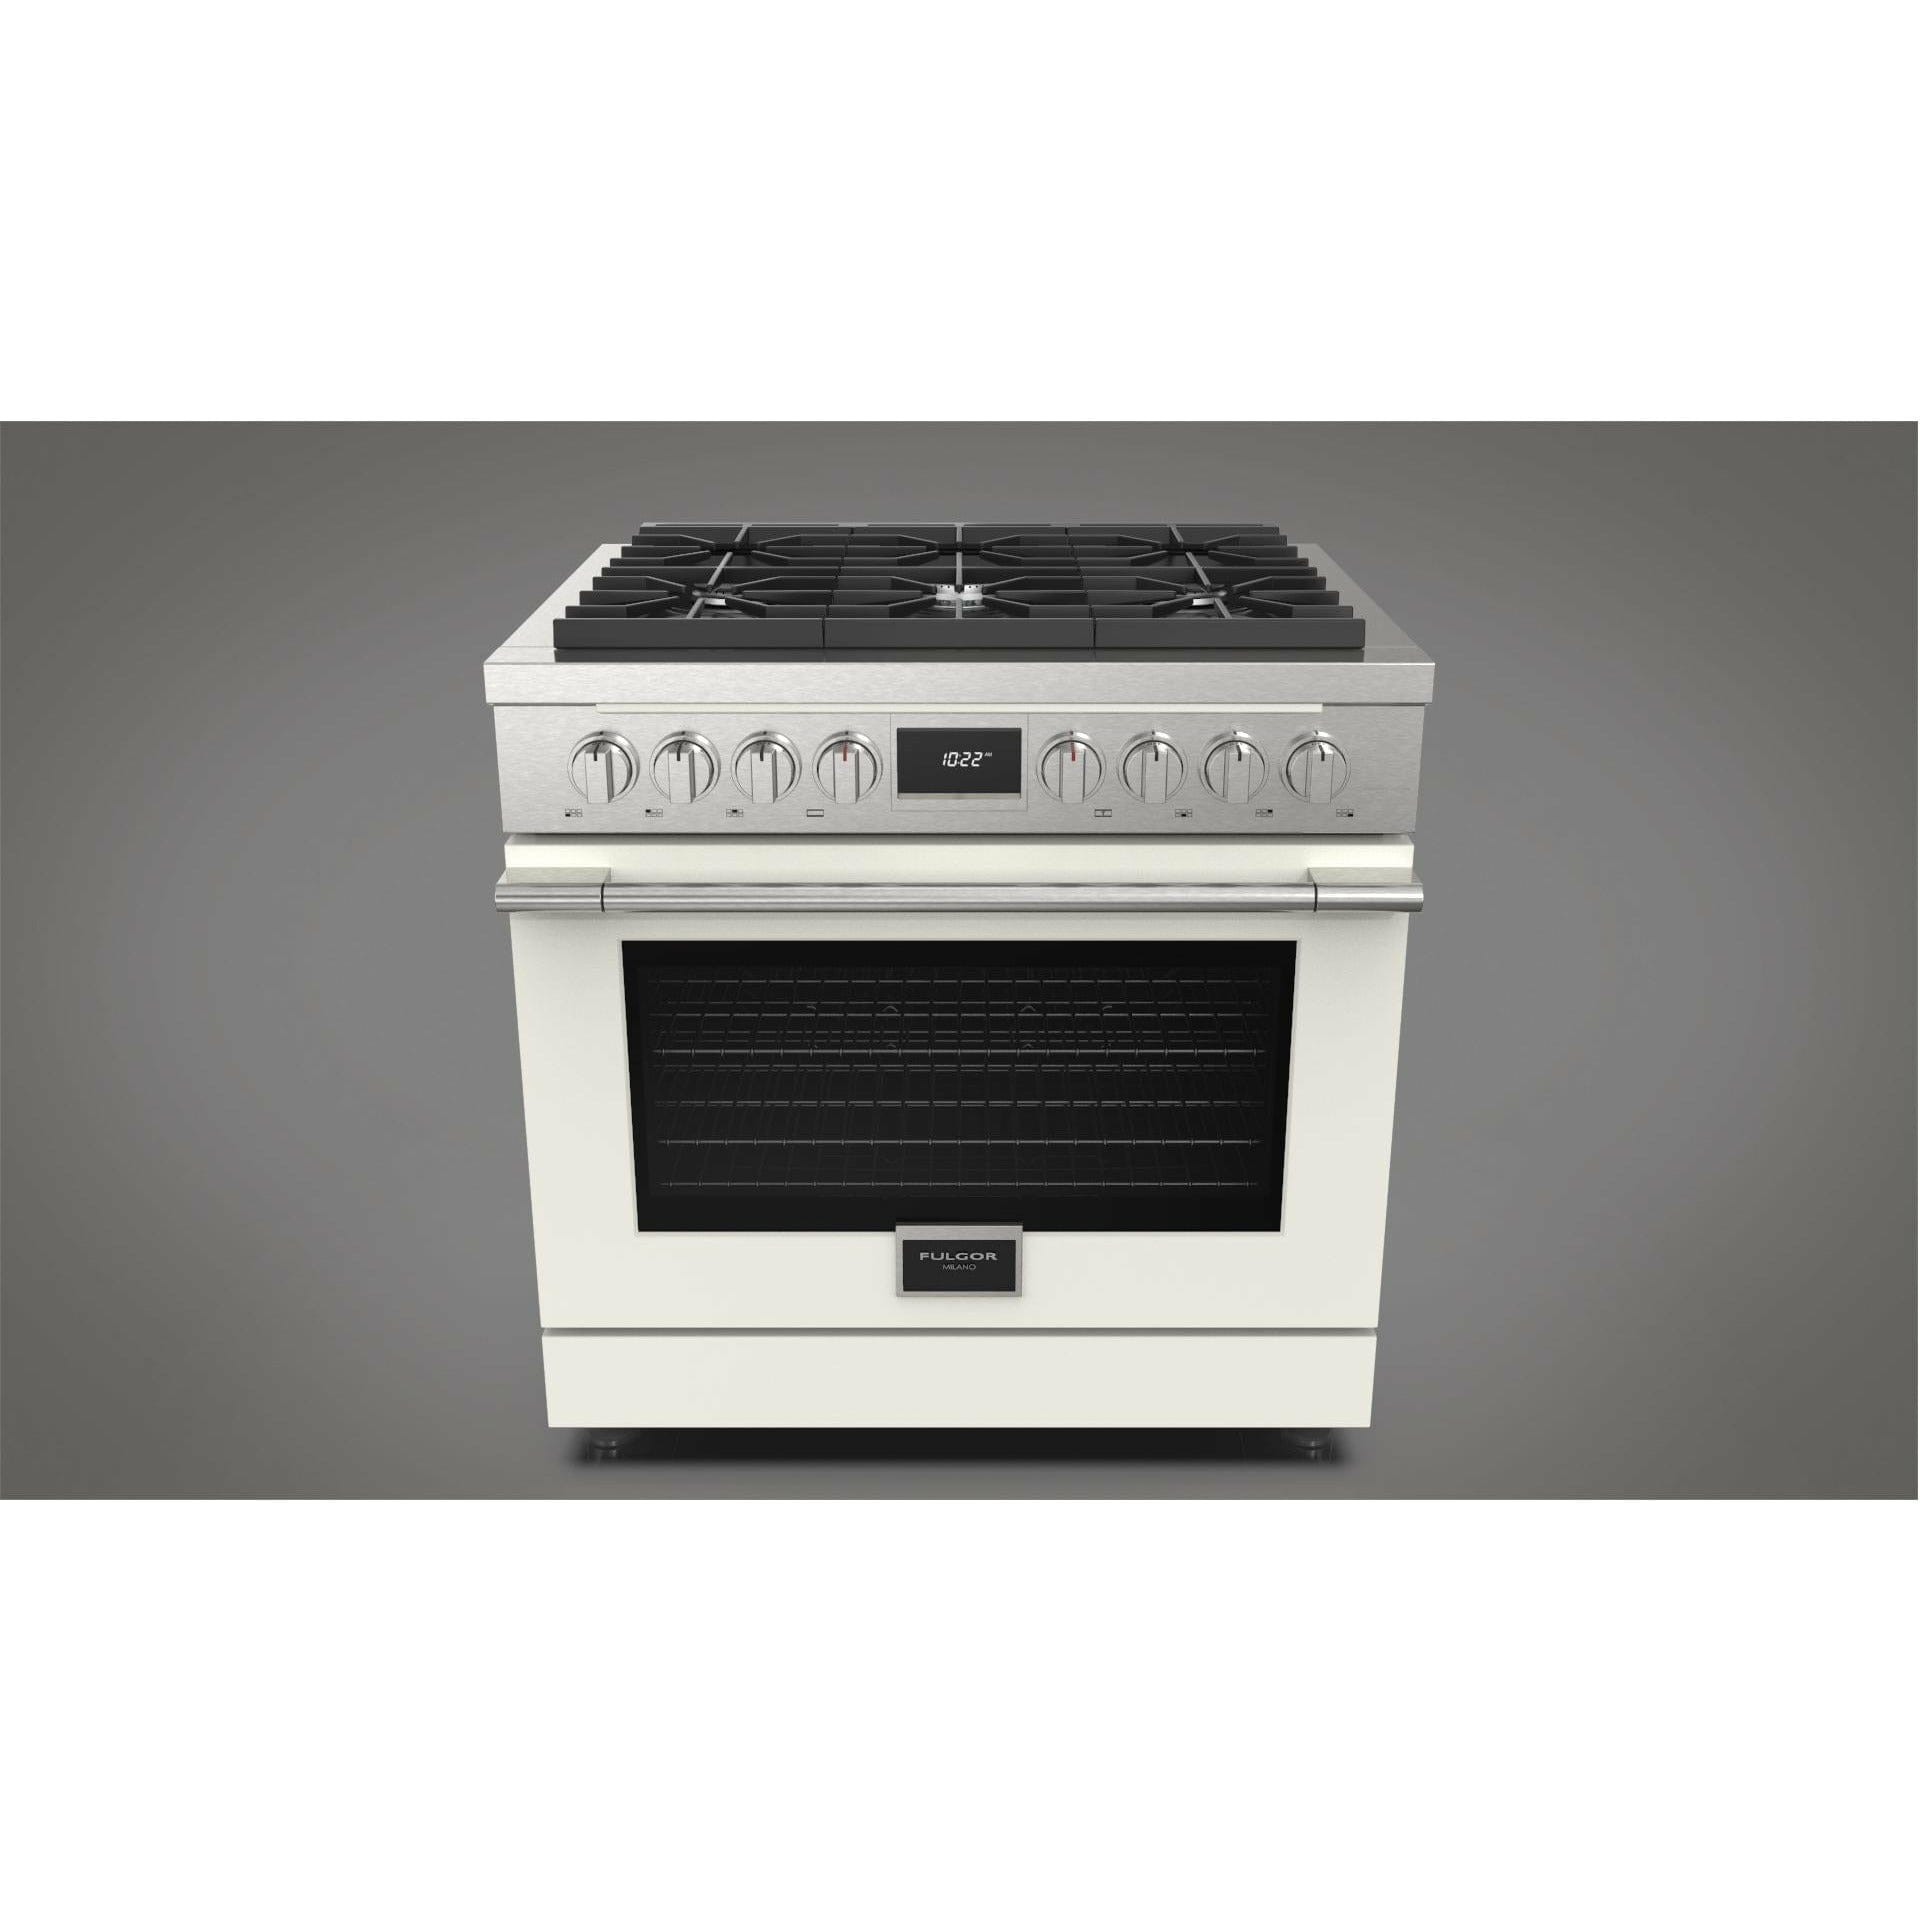 Fulgor Milano 36" Pro-Style Dual Fuel Range with 5.7 Cu. Ft. Capacity, Stainless Steel - F4PDF366S1 Ranges F4PDF366S1 + ACDKIT36MW Luxury Appliances Direct